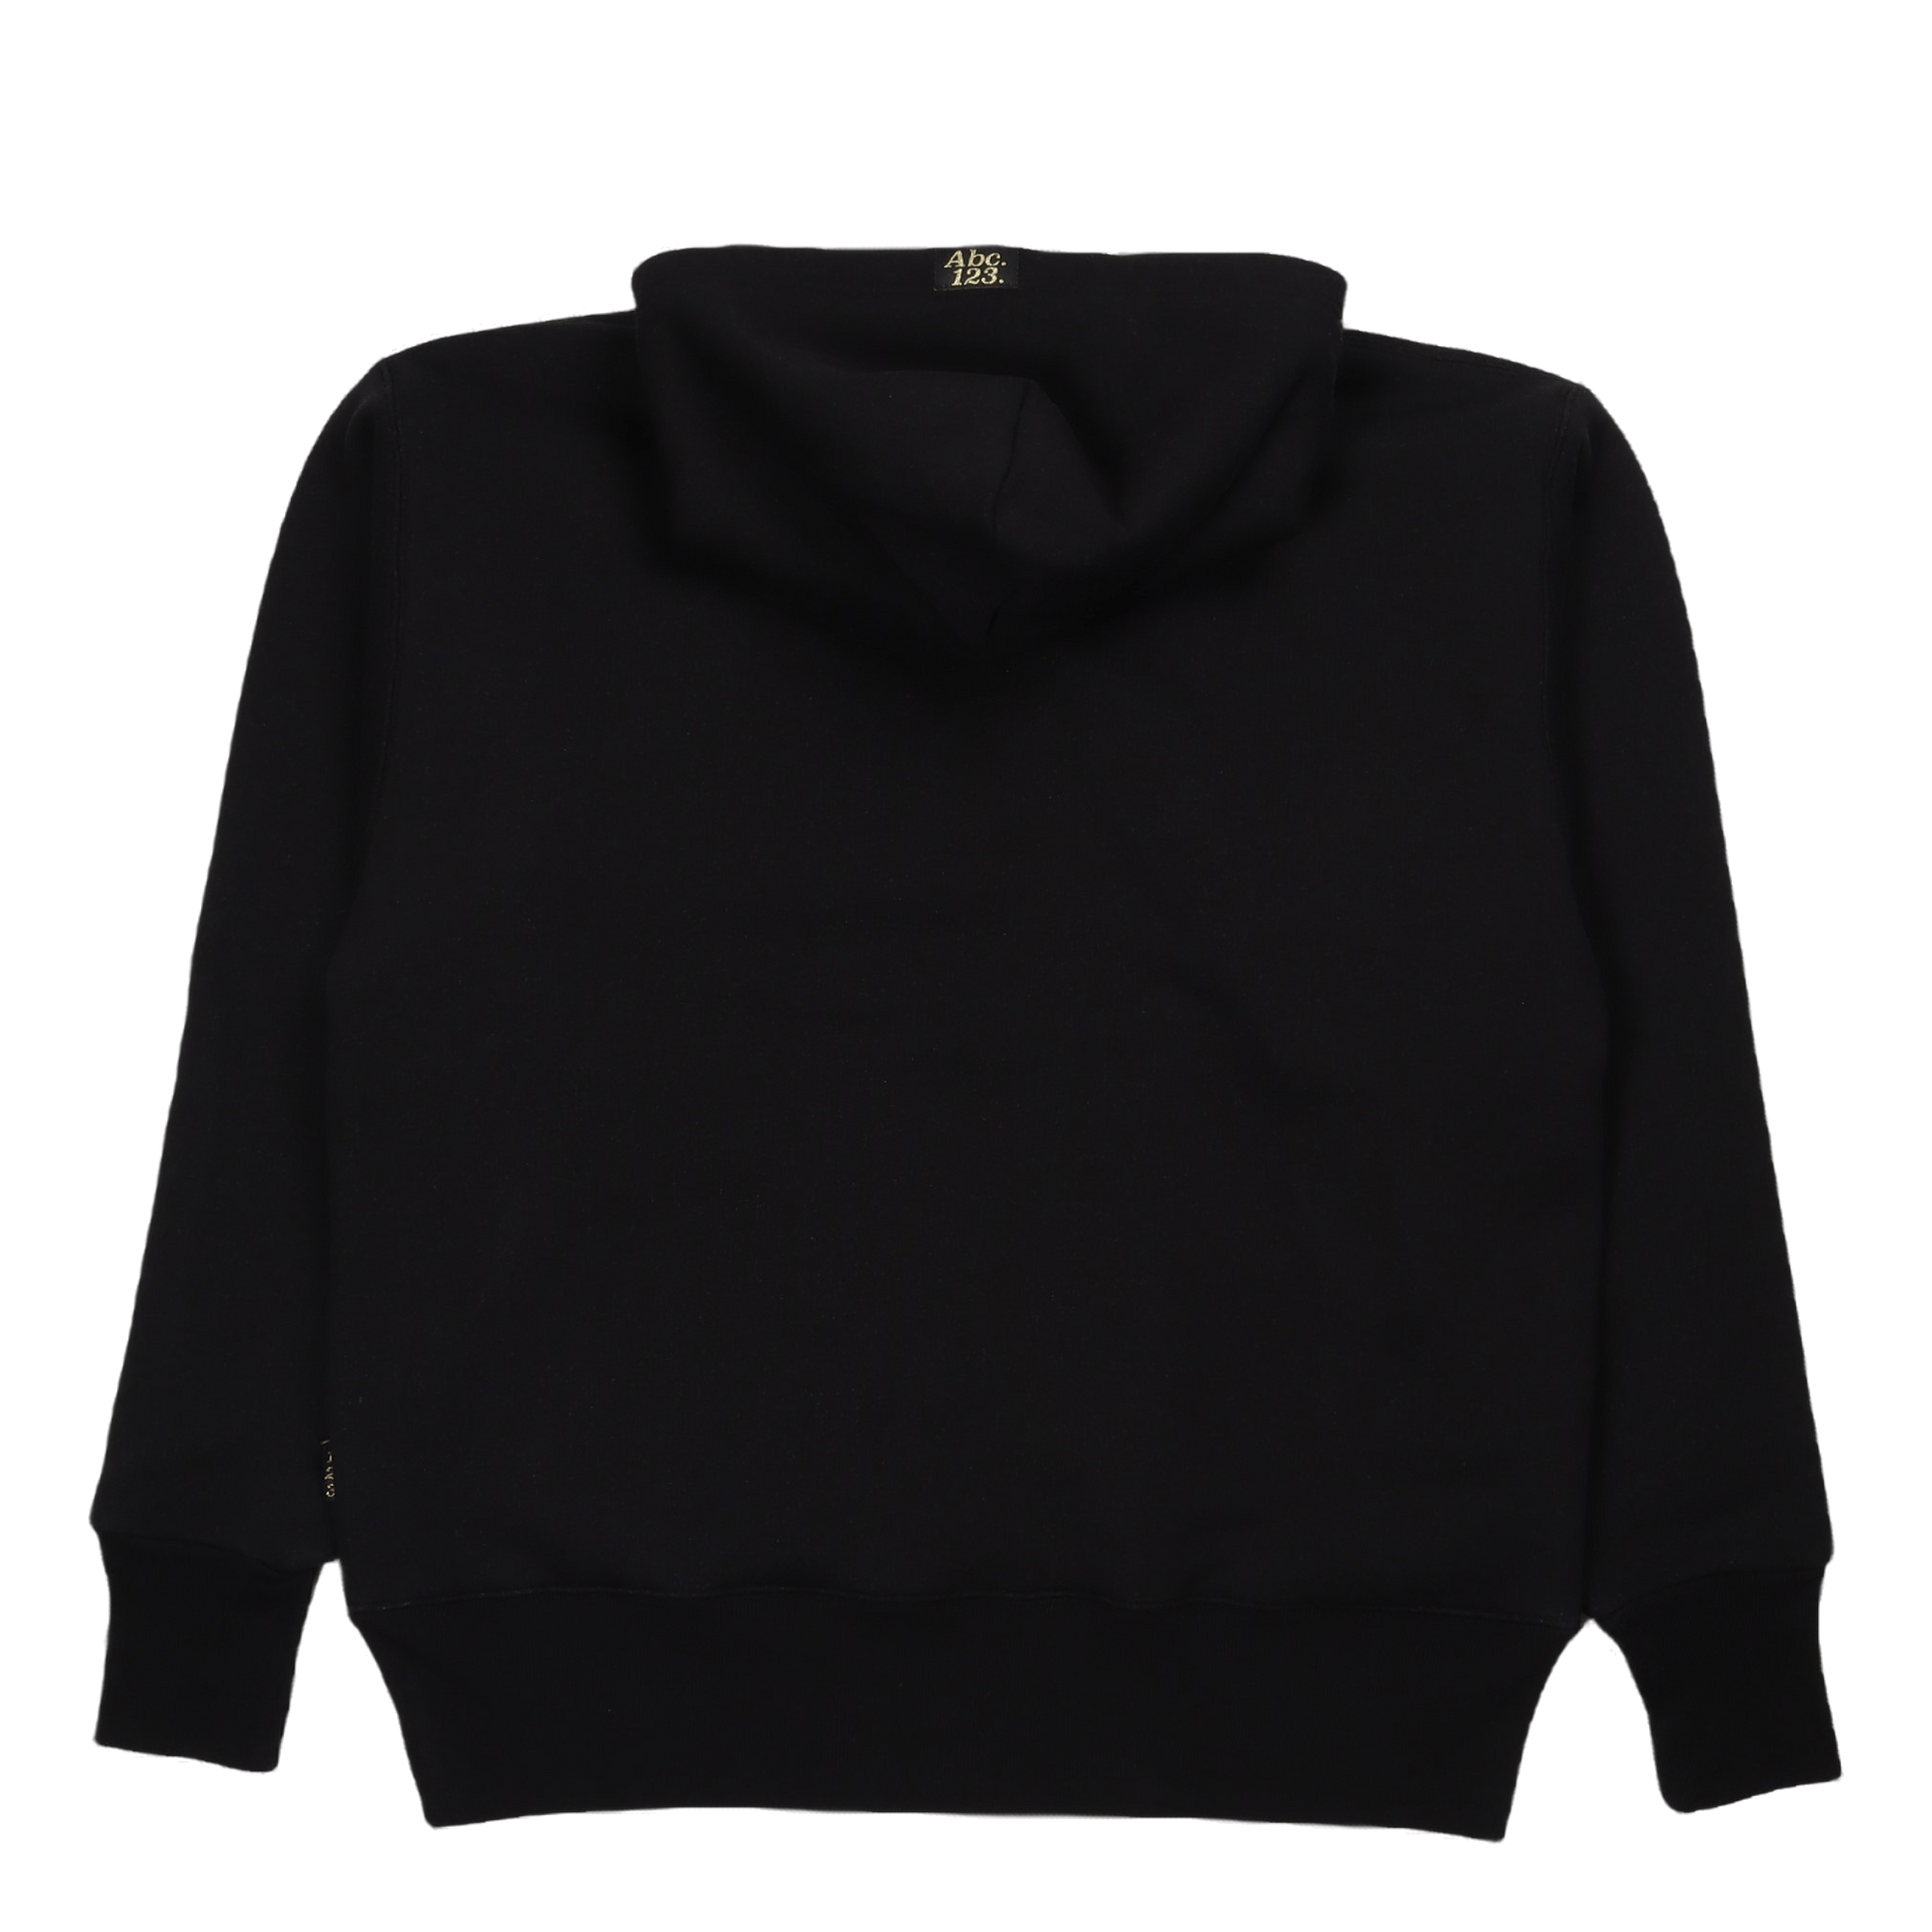 Abc. 123. Dbl Weight Pullover  Anthracite Black